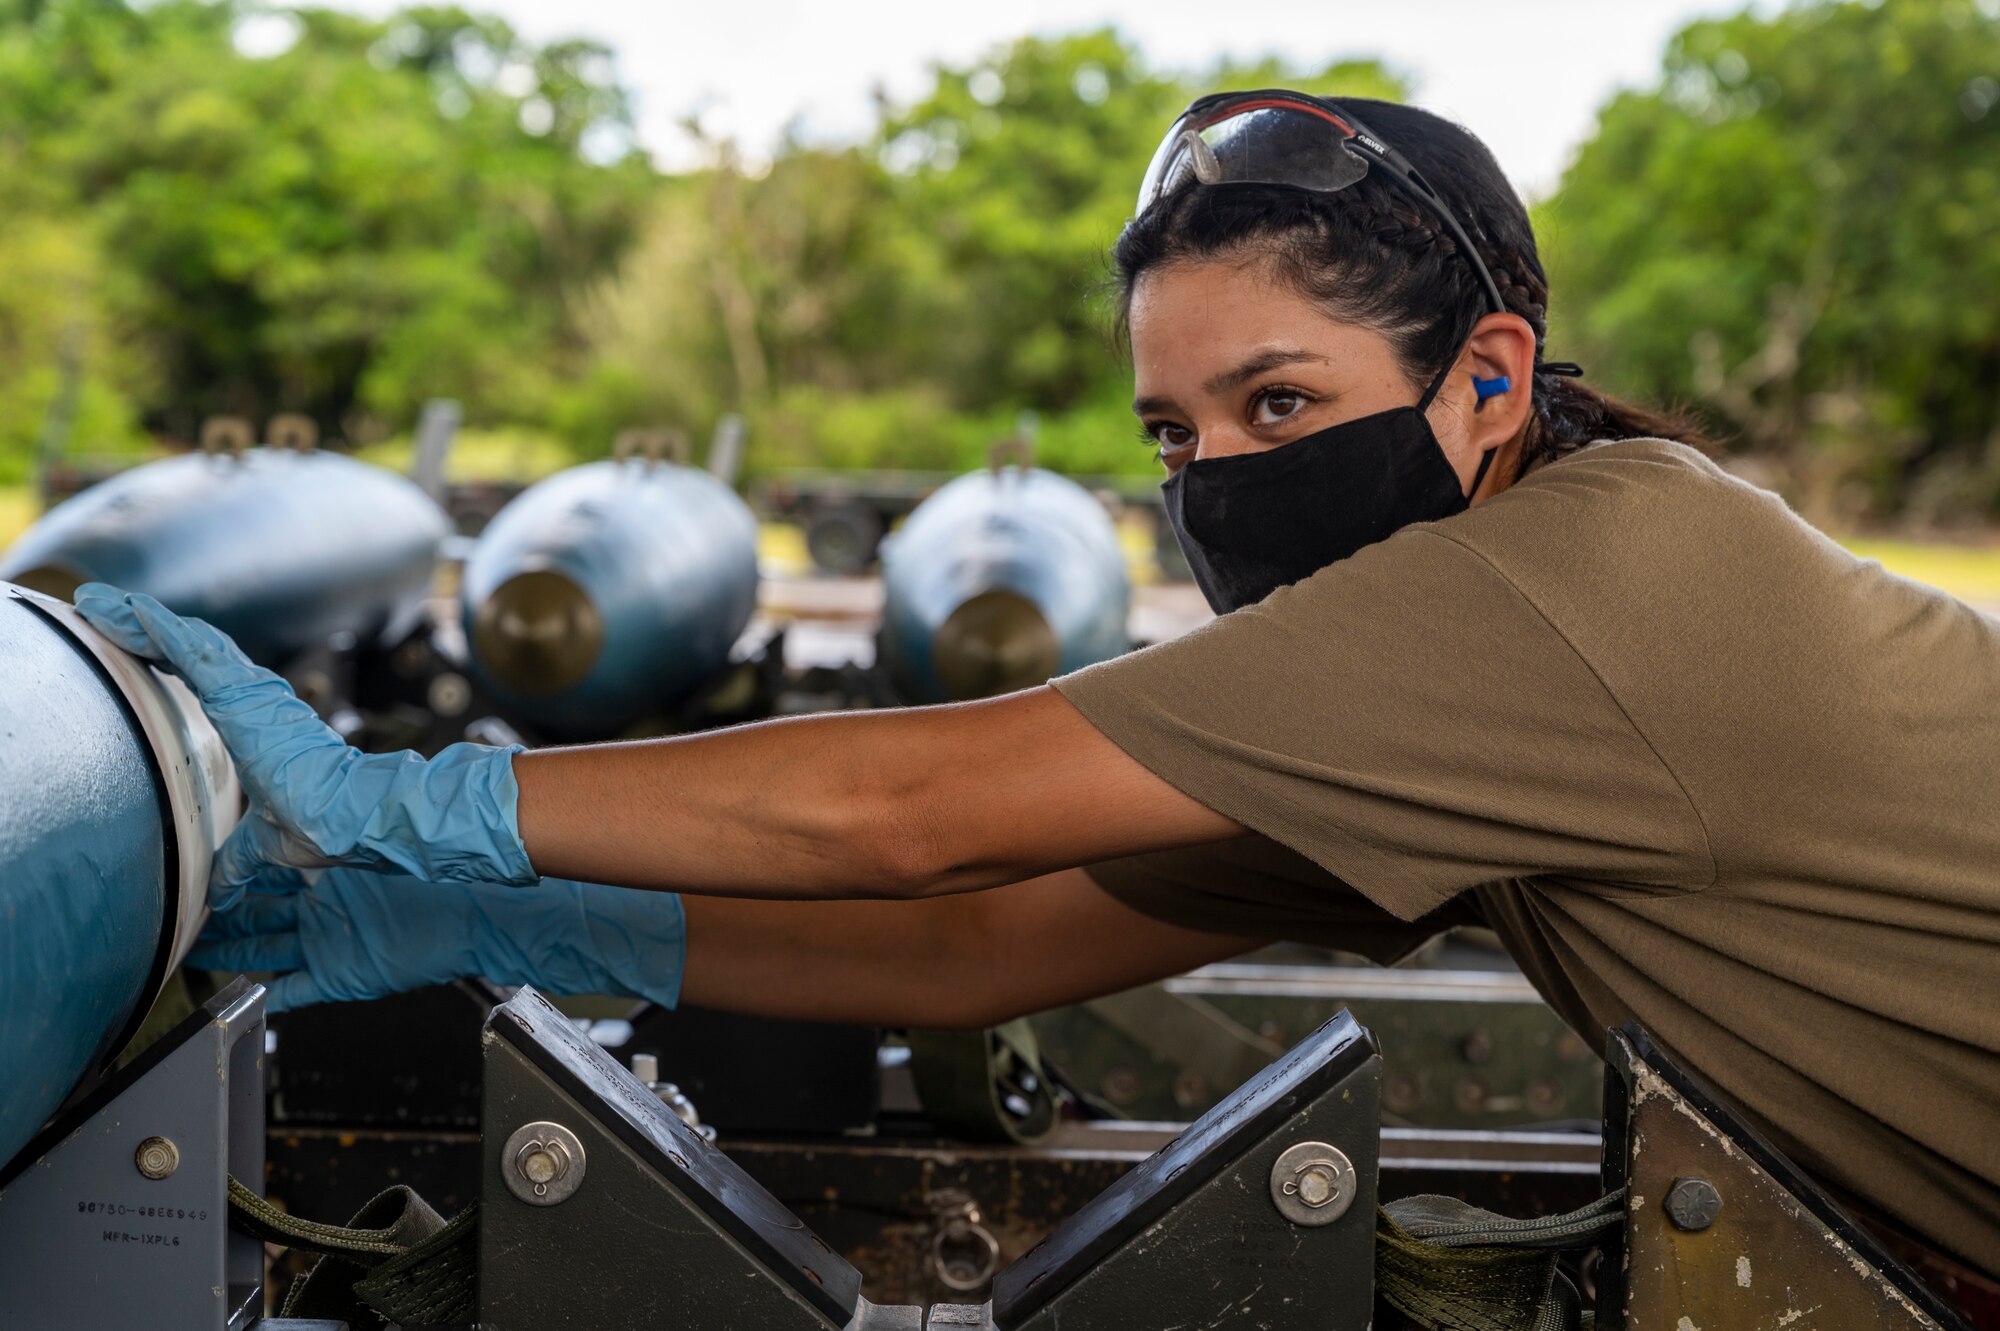 U.S. Air Force Staff Sgt. Amanda Solis, a conventional maintenance inspector, assigned to the 2nd Munitions Squadron, Barksdale Air Force Base, Louisiana, lays a stencil to spray paint identifying marks on the side of a BDU-50 training bomb for Bomber Task Force missions at Andersen Air Force Base, Guam, Aug. 27, 2021. This deployment allows aircrew and support personnel to conduct theater integration and to improve bomber interoperability with allies and partners. (U.S. Air Force photo by Staff Sgt. Alysia T. Blake)